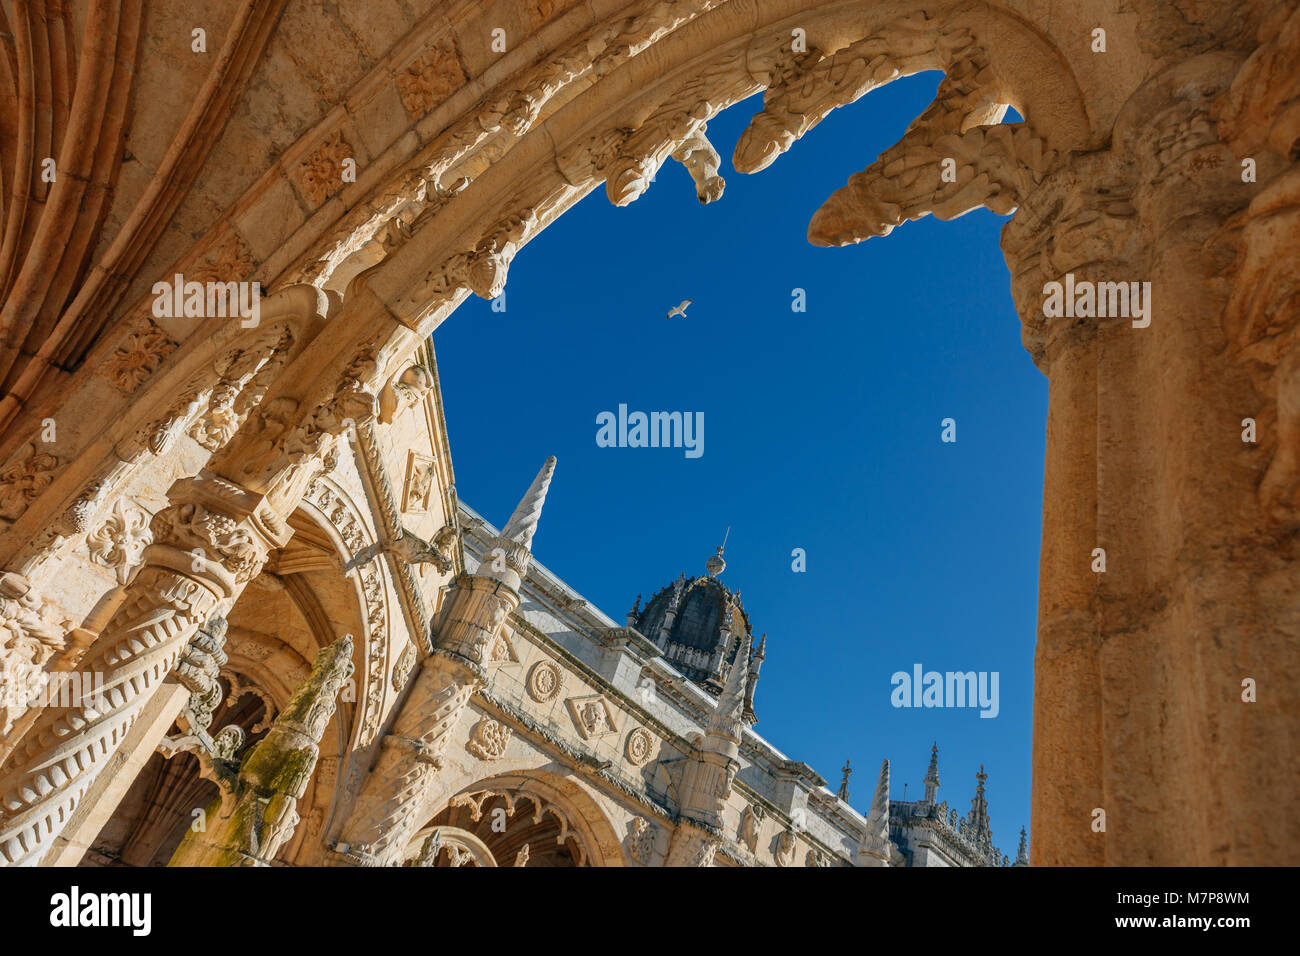 Architecture of Jeronimos Monastery in Lisbon, Portugal. Manueline style architecture. Stock Photo